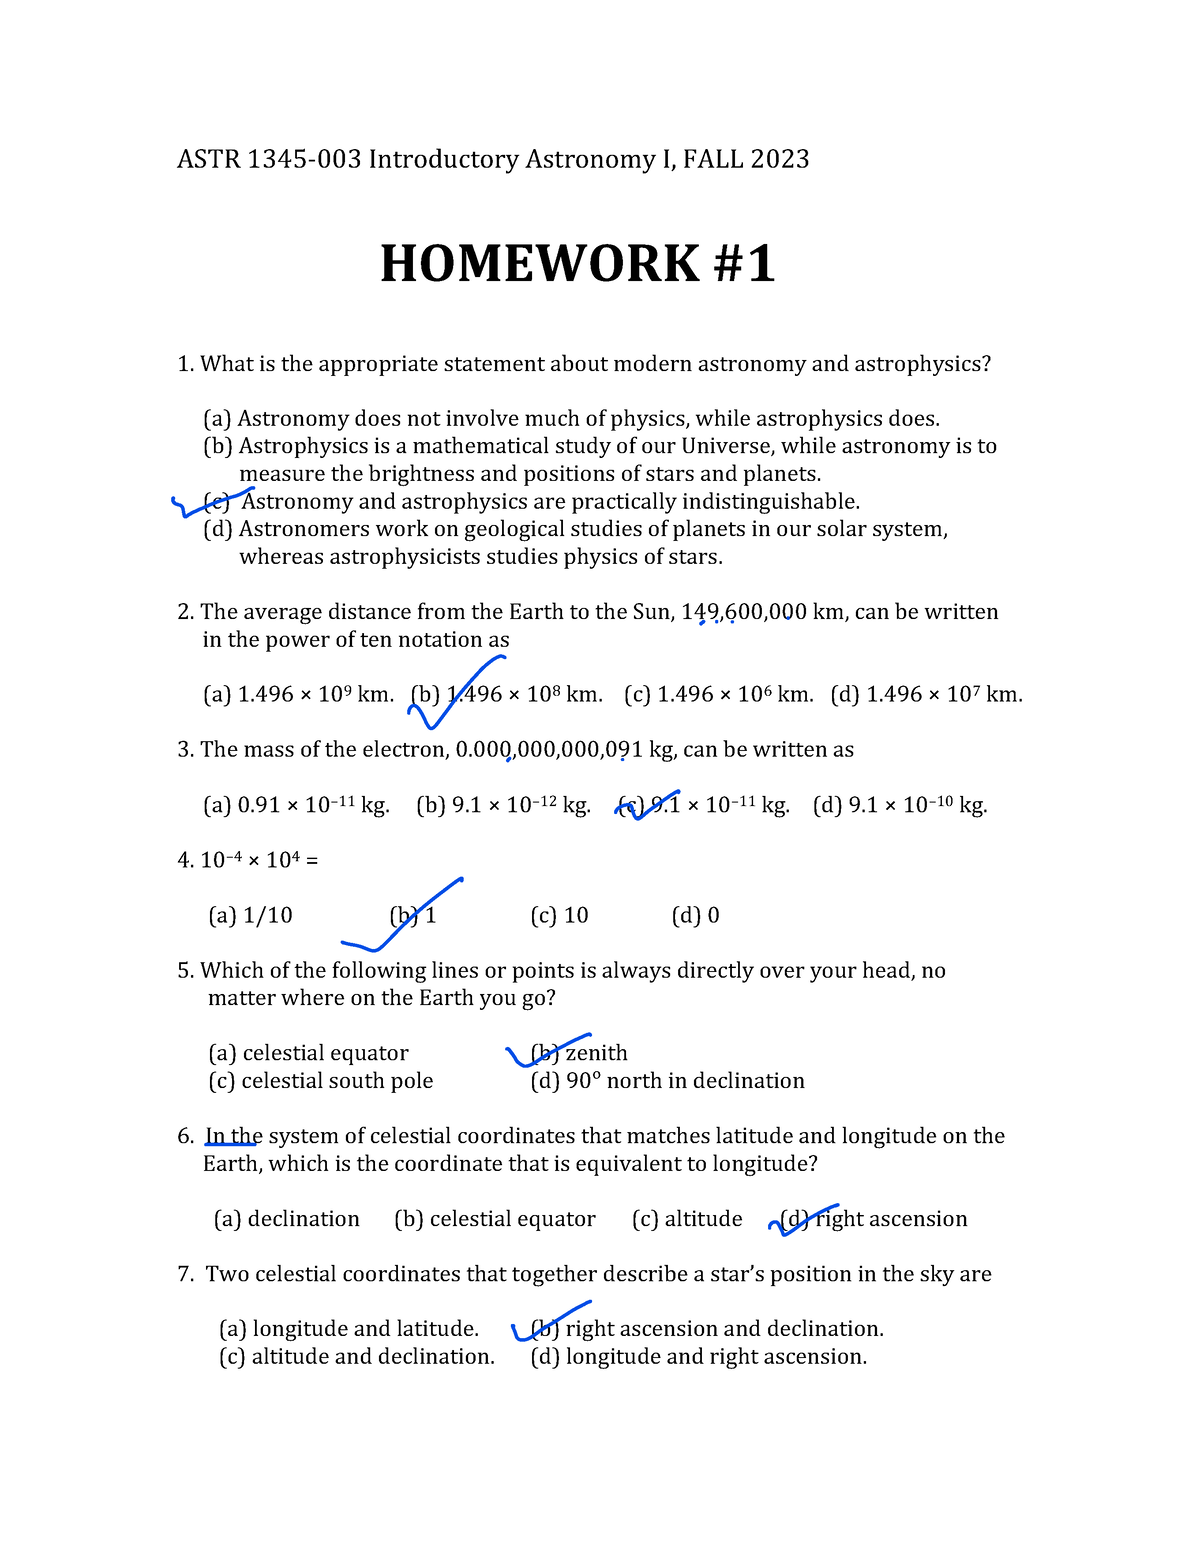 mastering astronomy chapter 1 homework answers